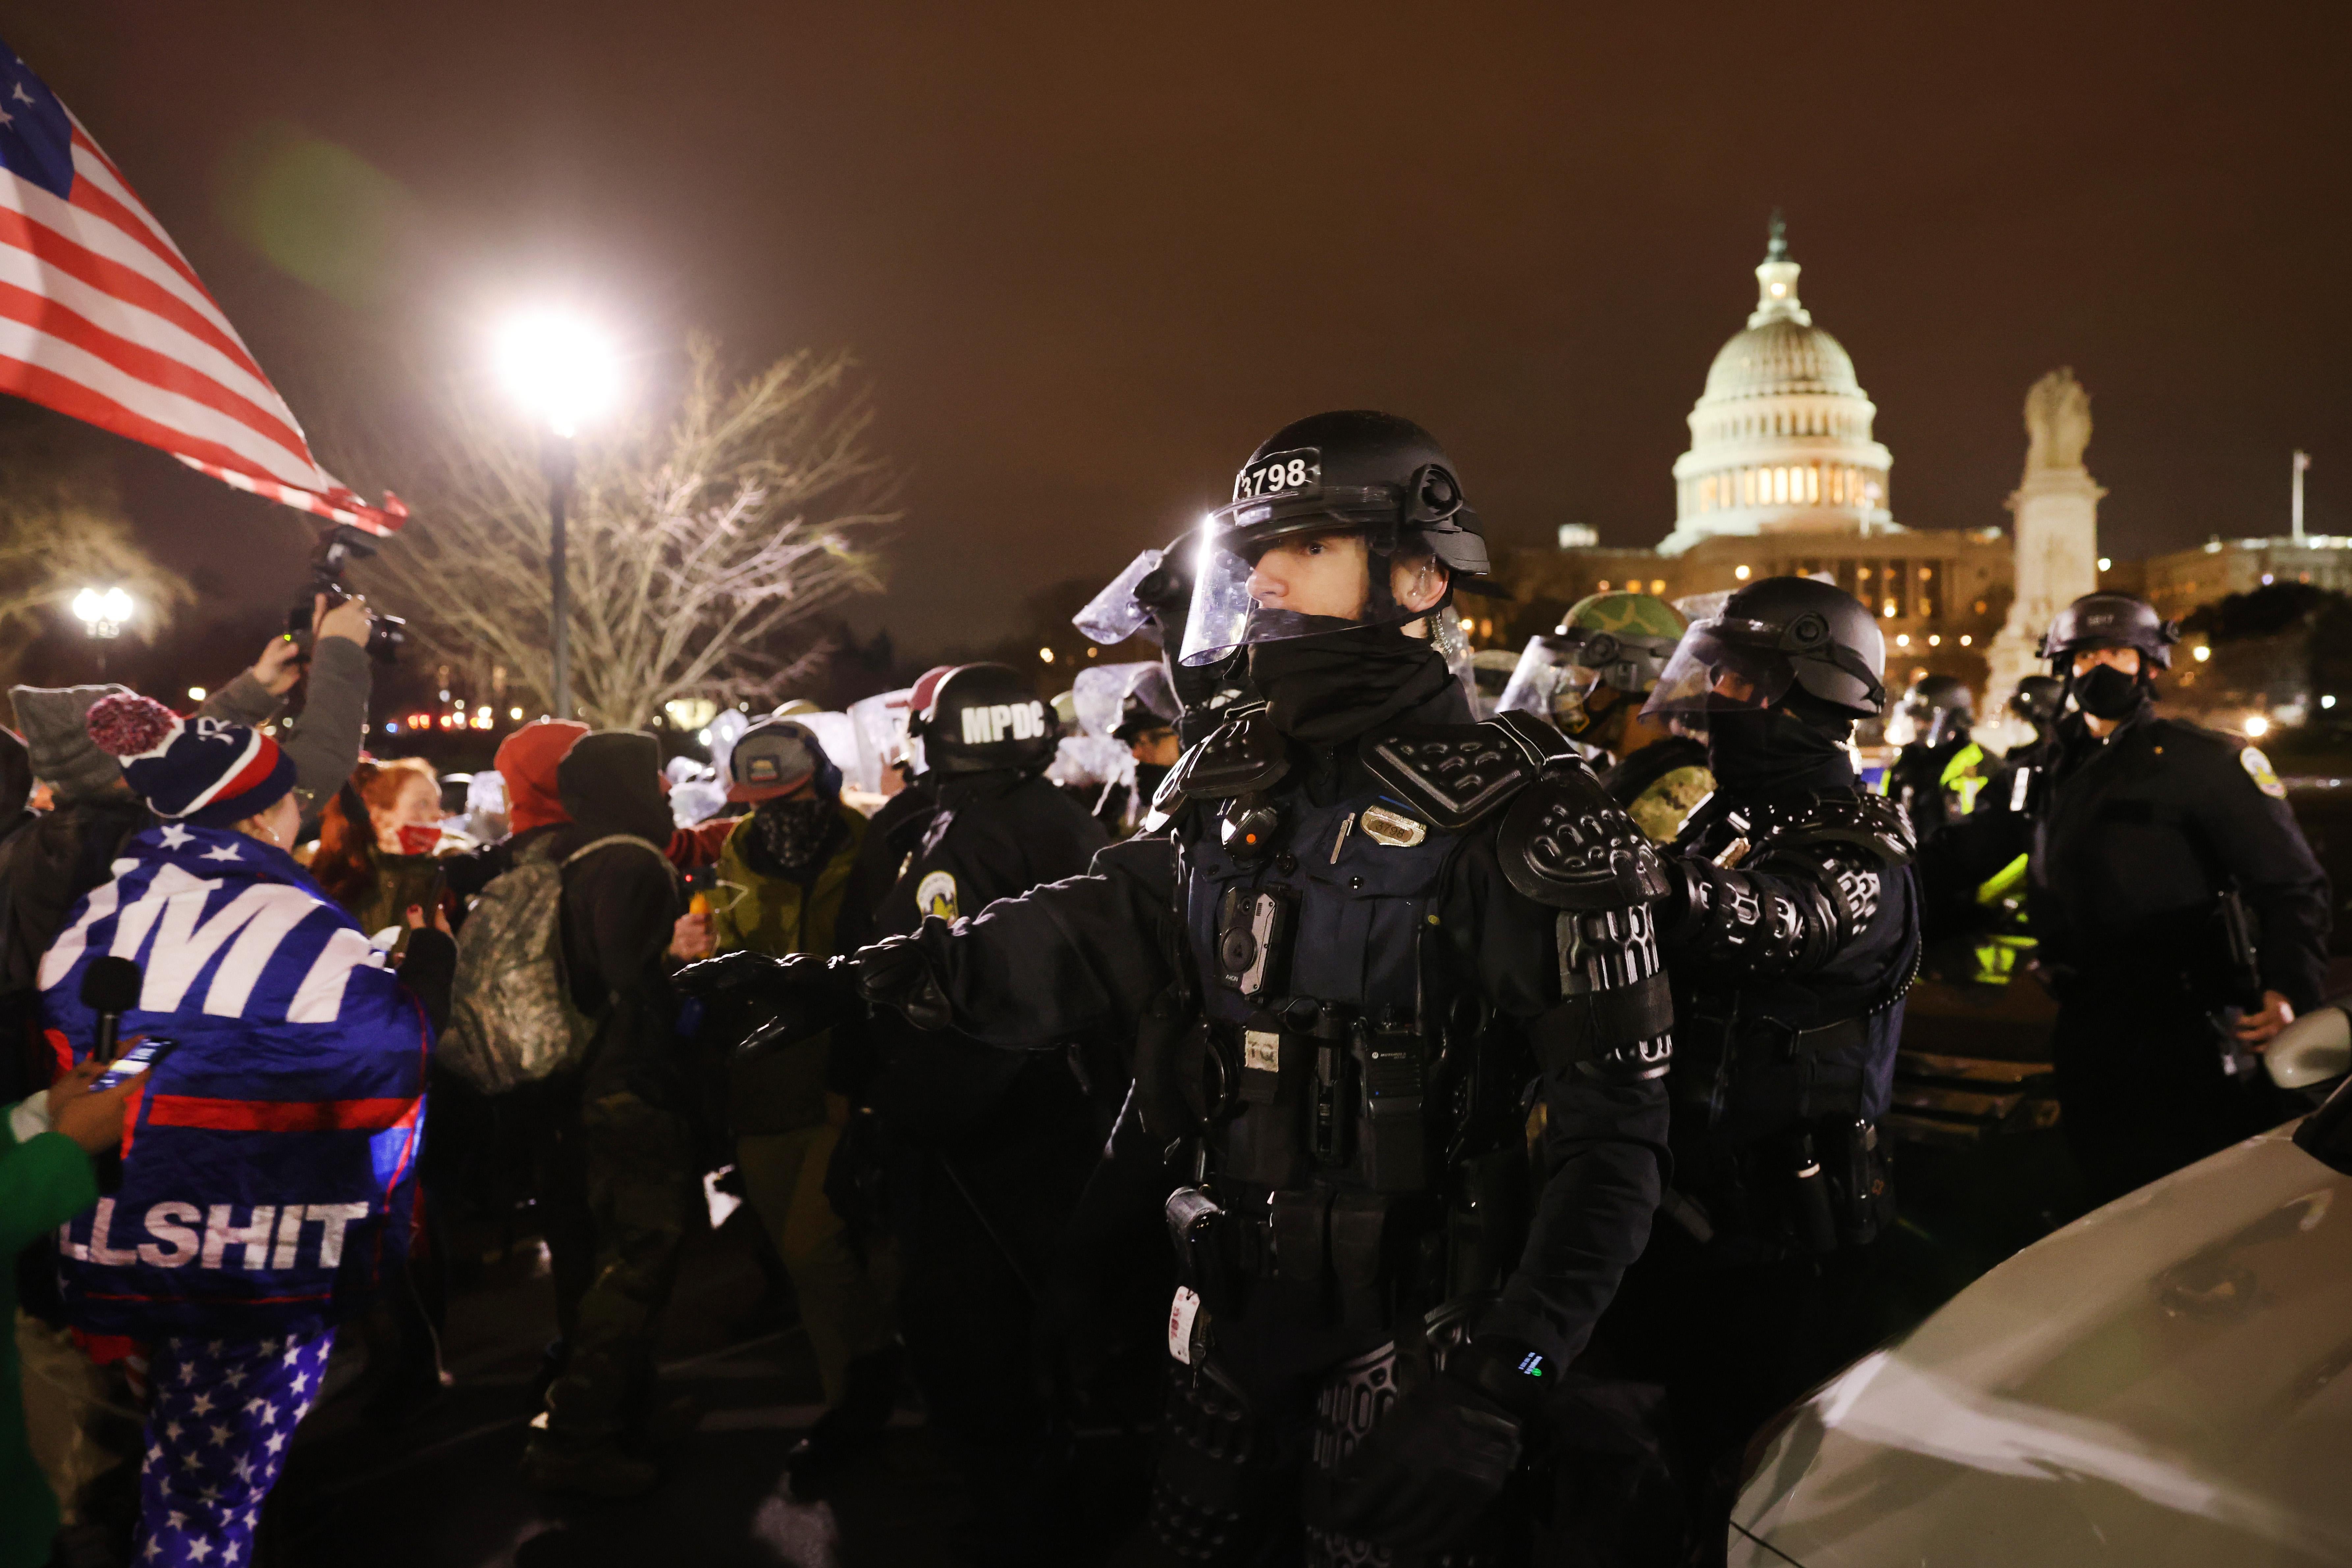 National Guard members and D.C. police in riot gear corral a large crowd of Trump supporters in front of the Capitol at night after the attack on January 6